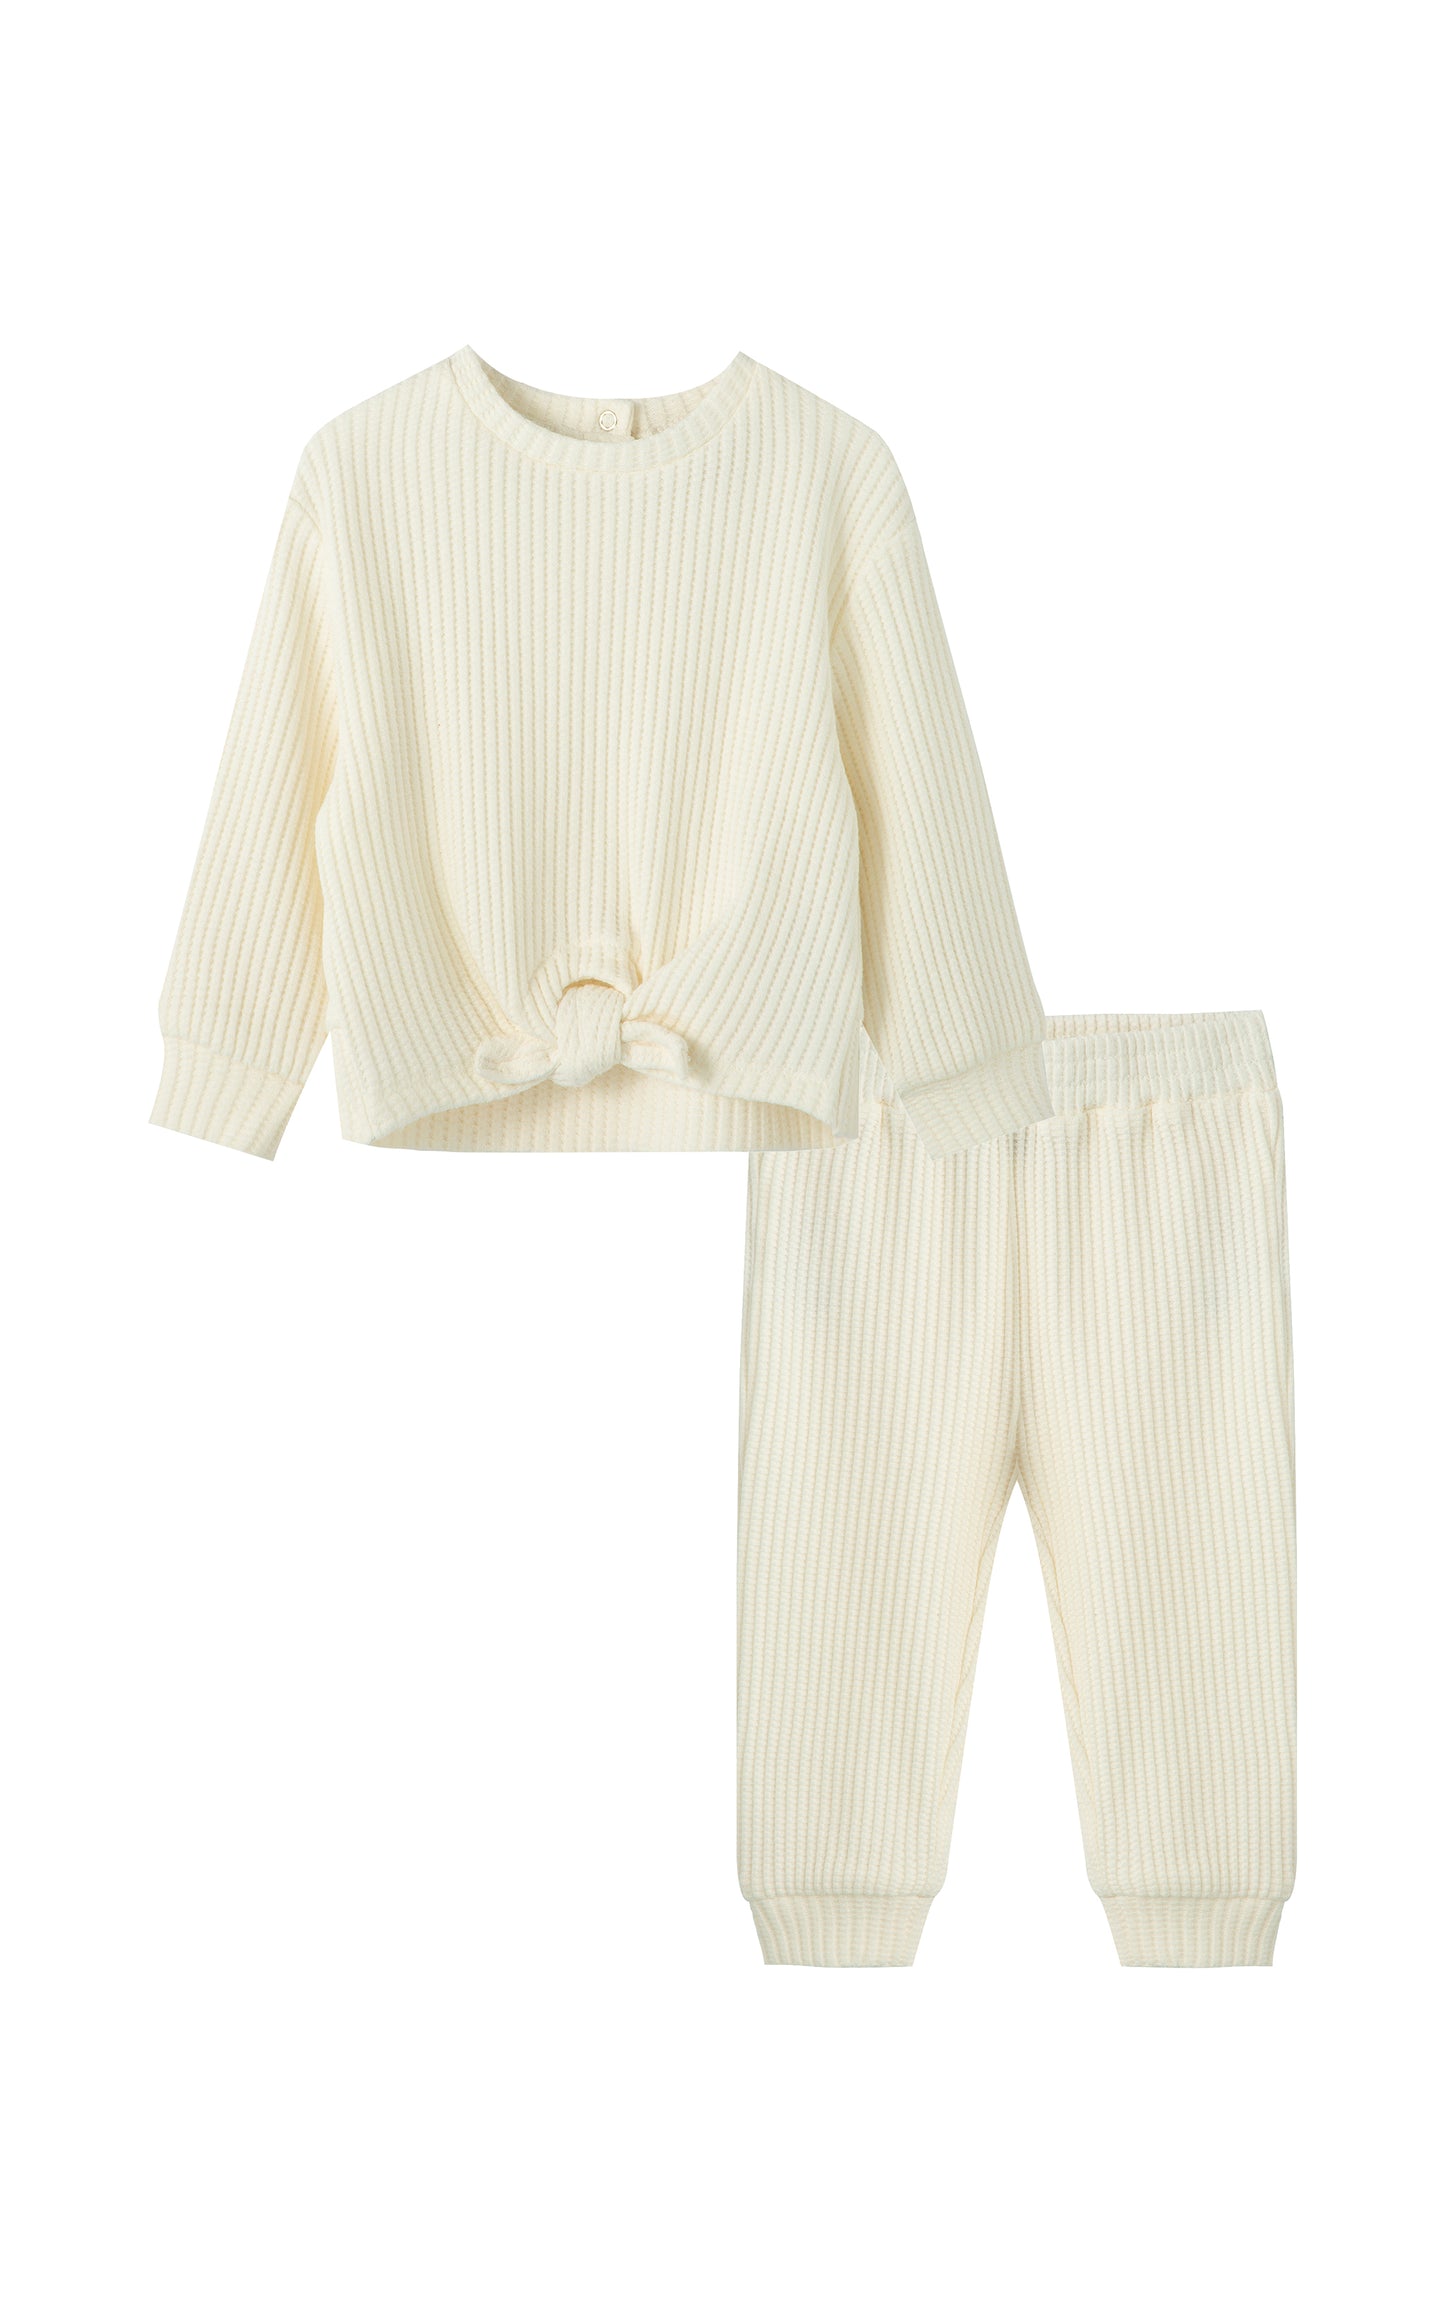 Front view of off-white textured knit pant set with long sleeve